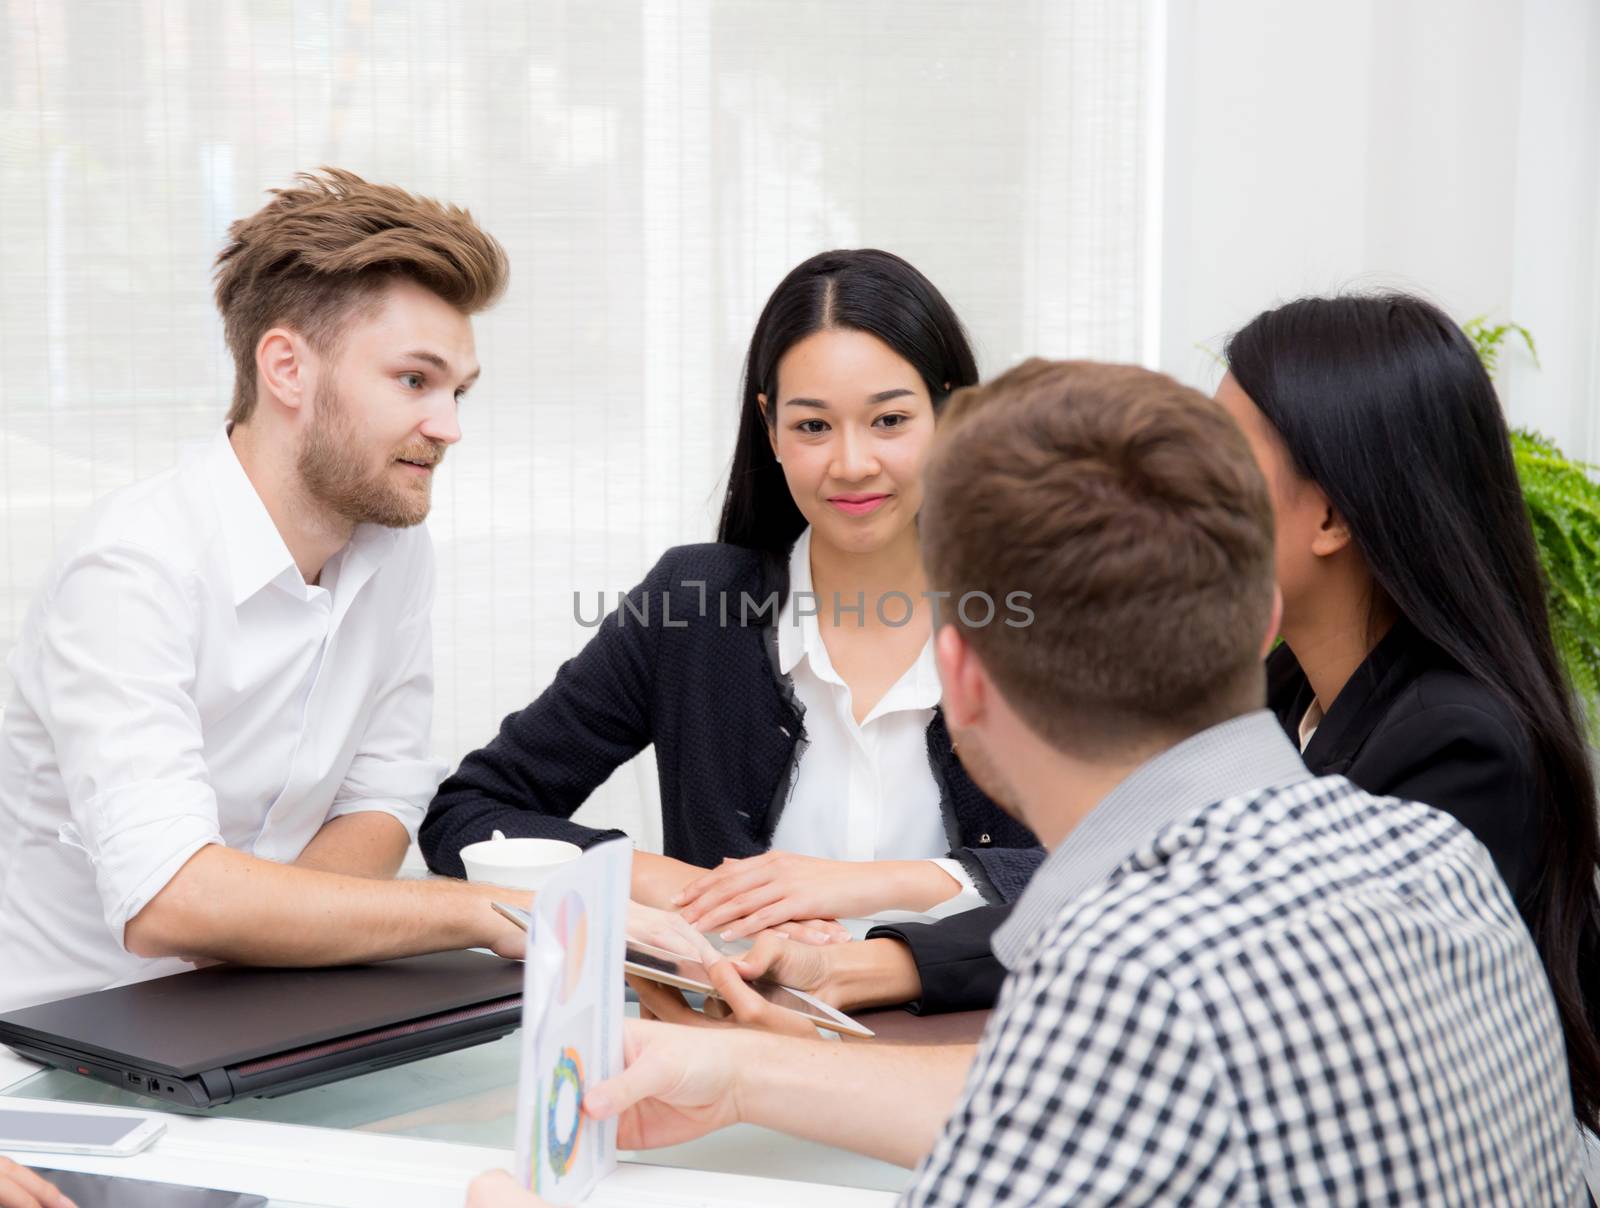 Group of business people brainstorming together in the meeting room.